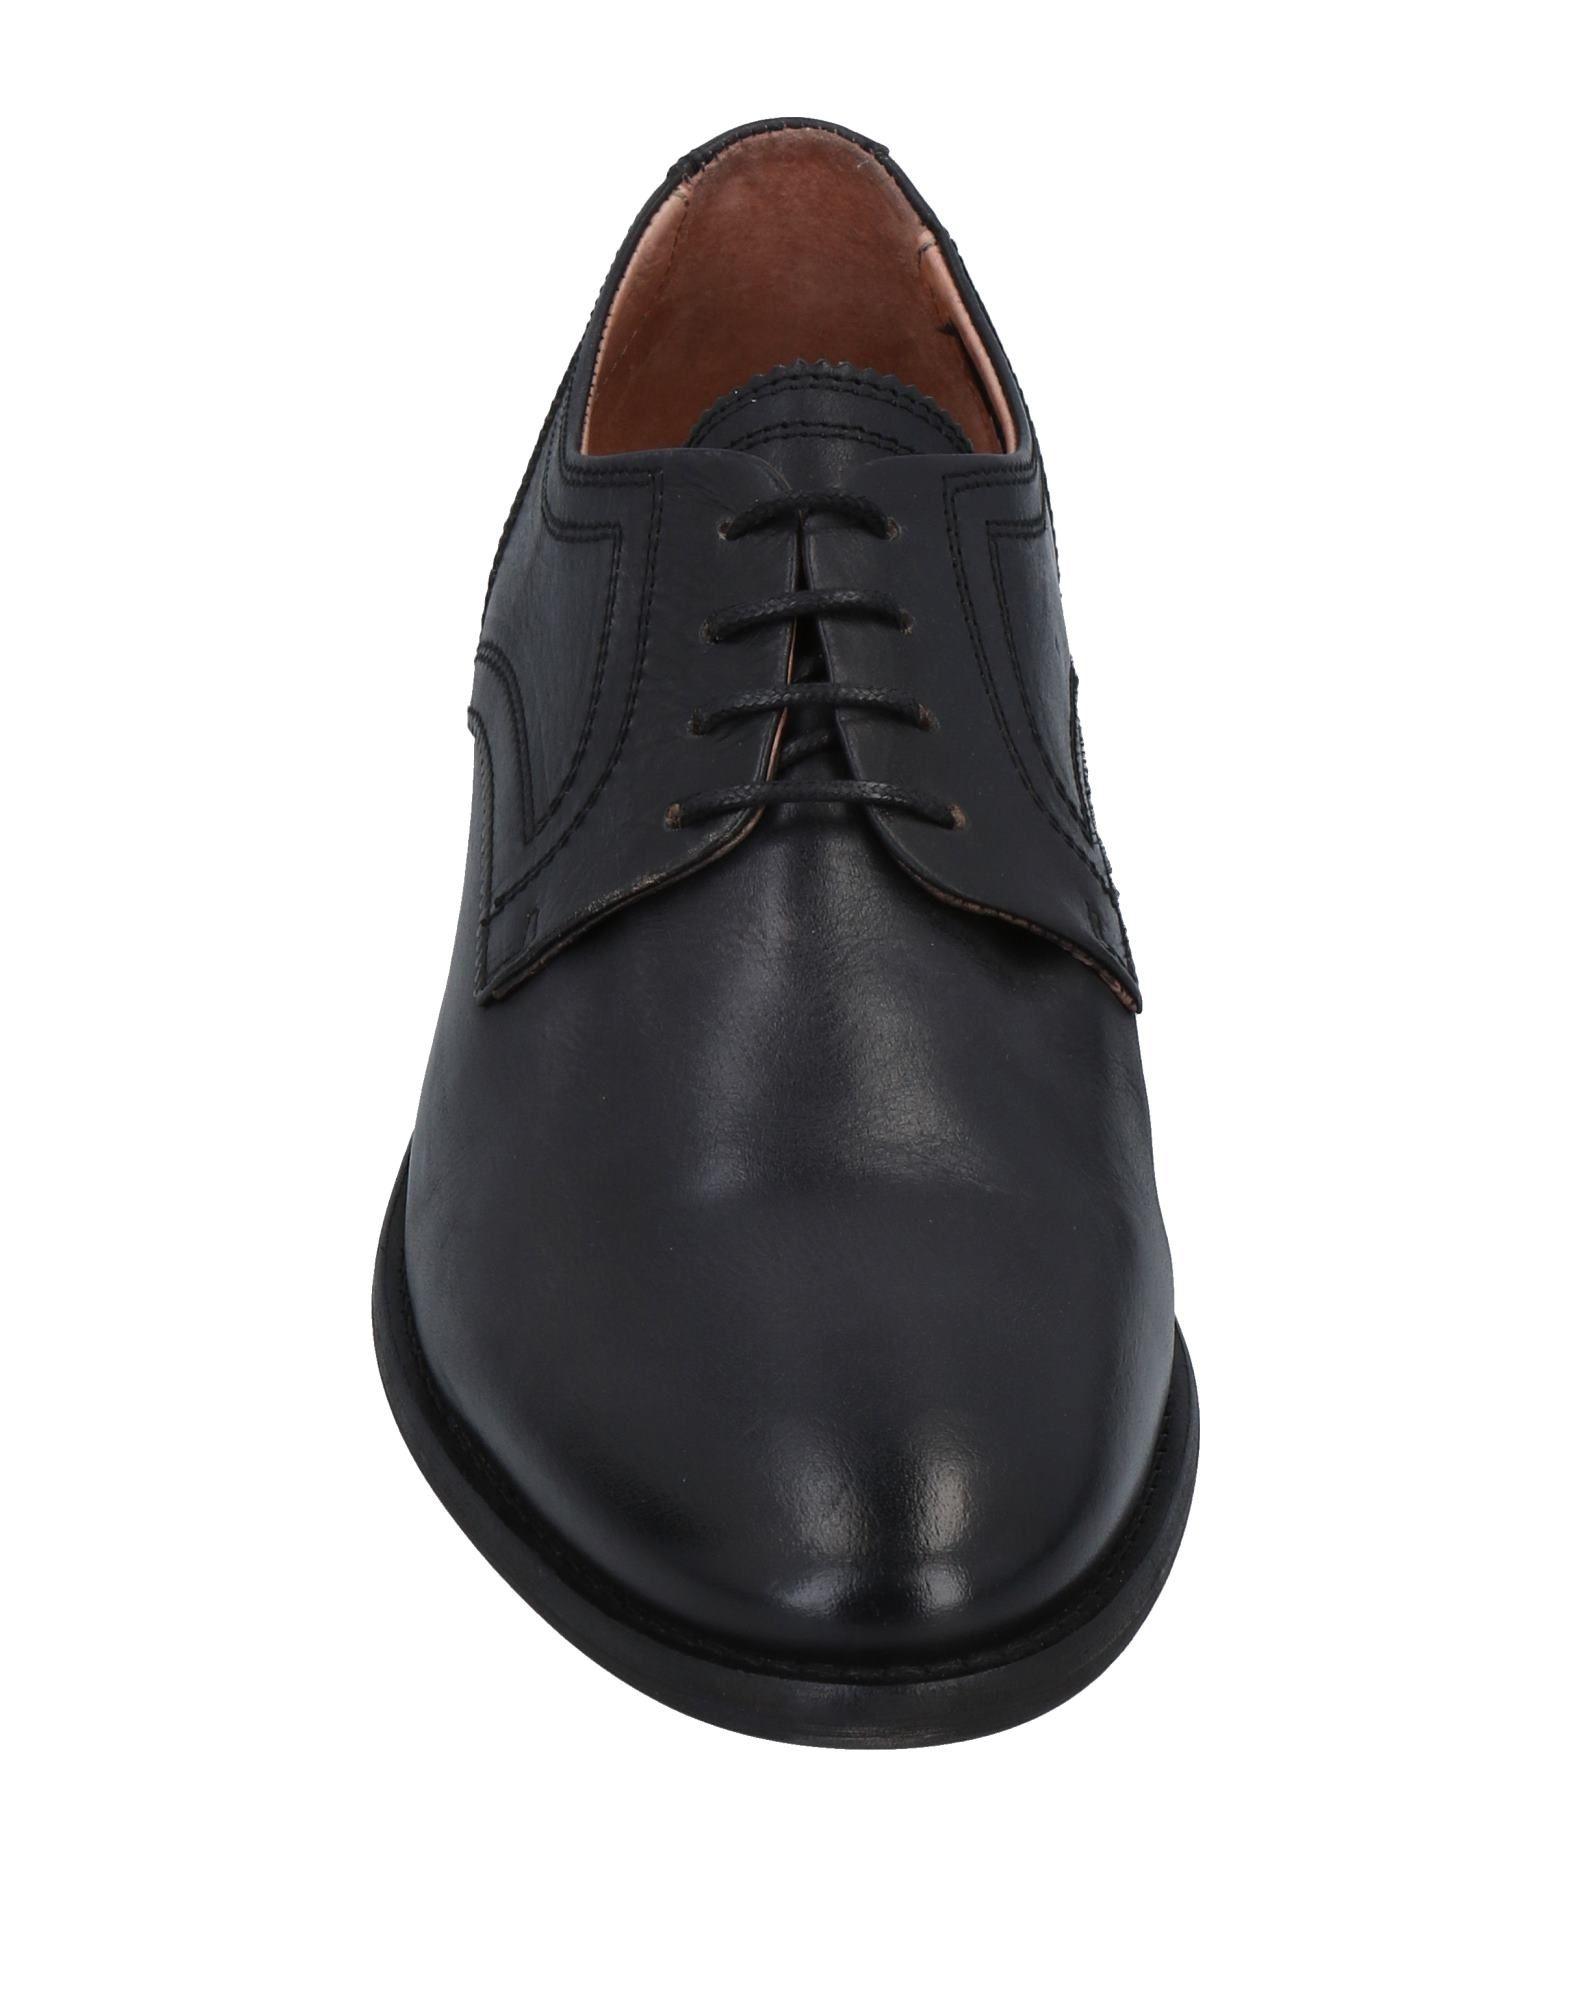 Replay Leather Lace-up Shoe in Black for Men - Lyst